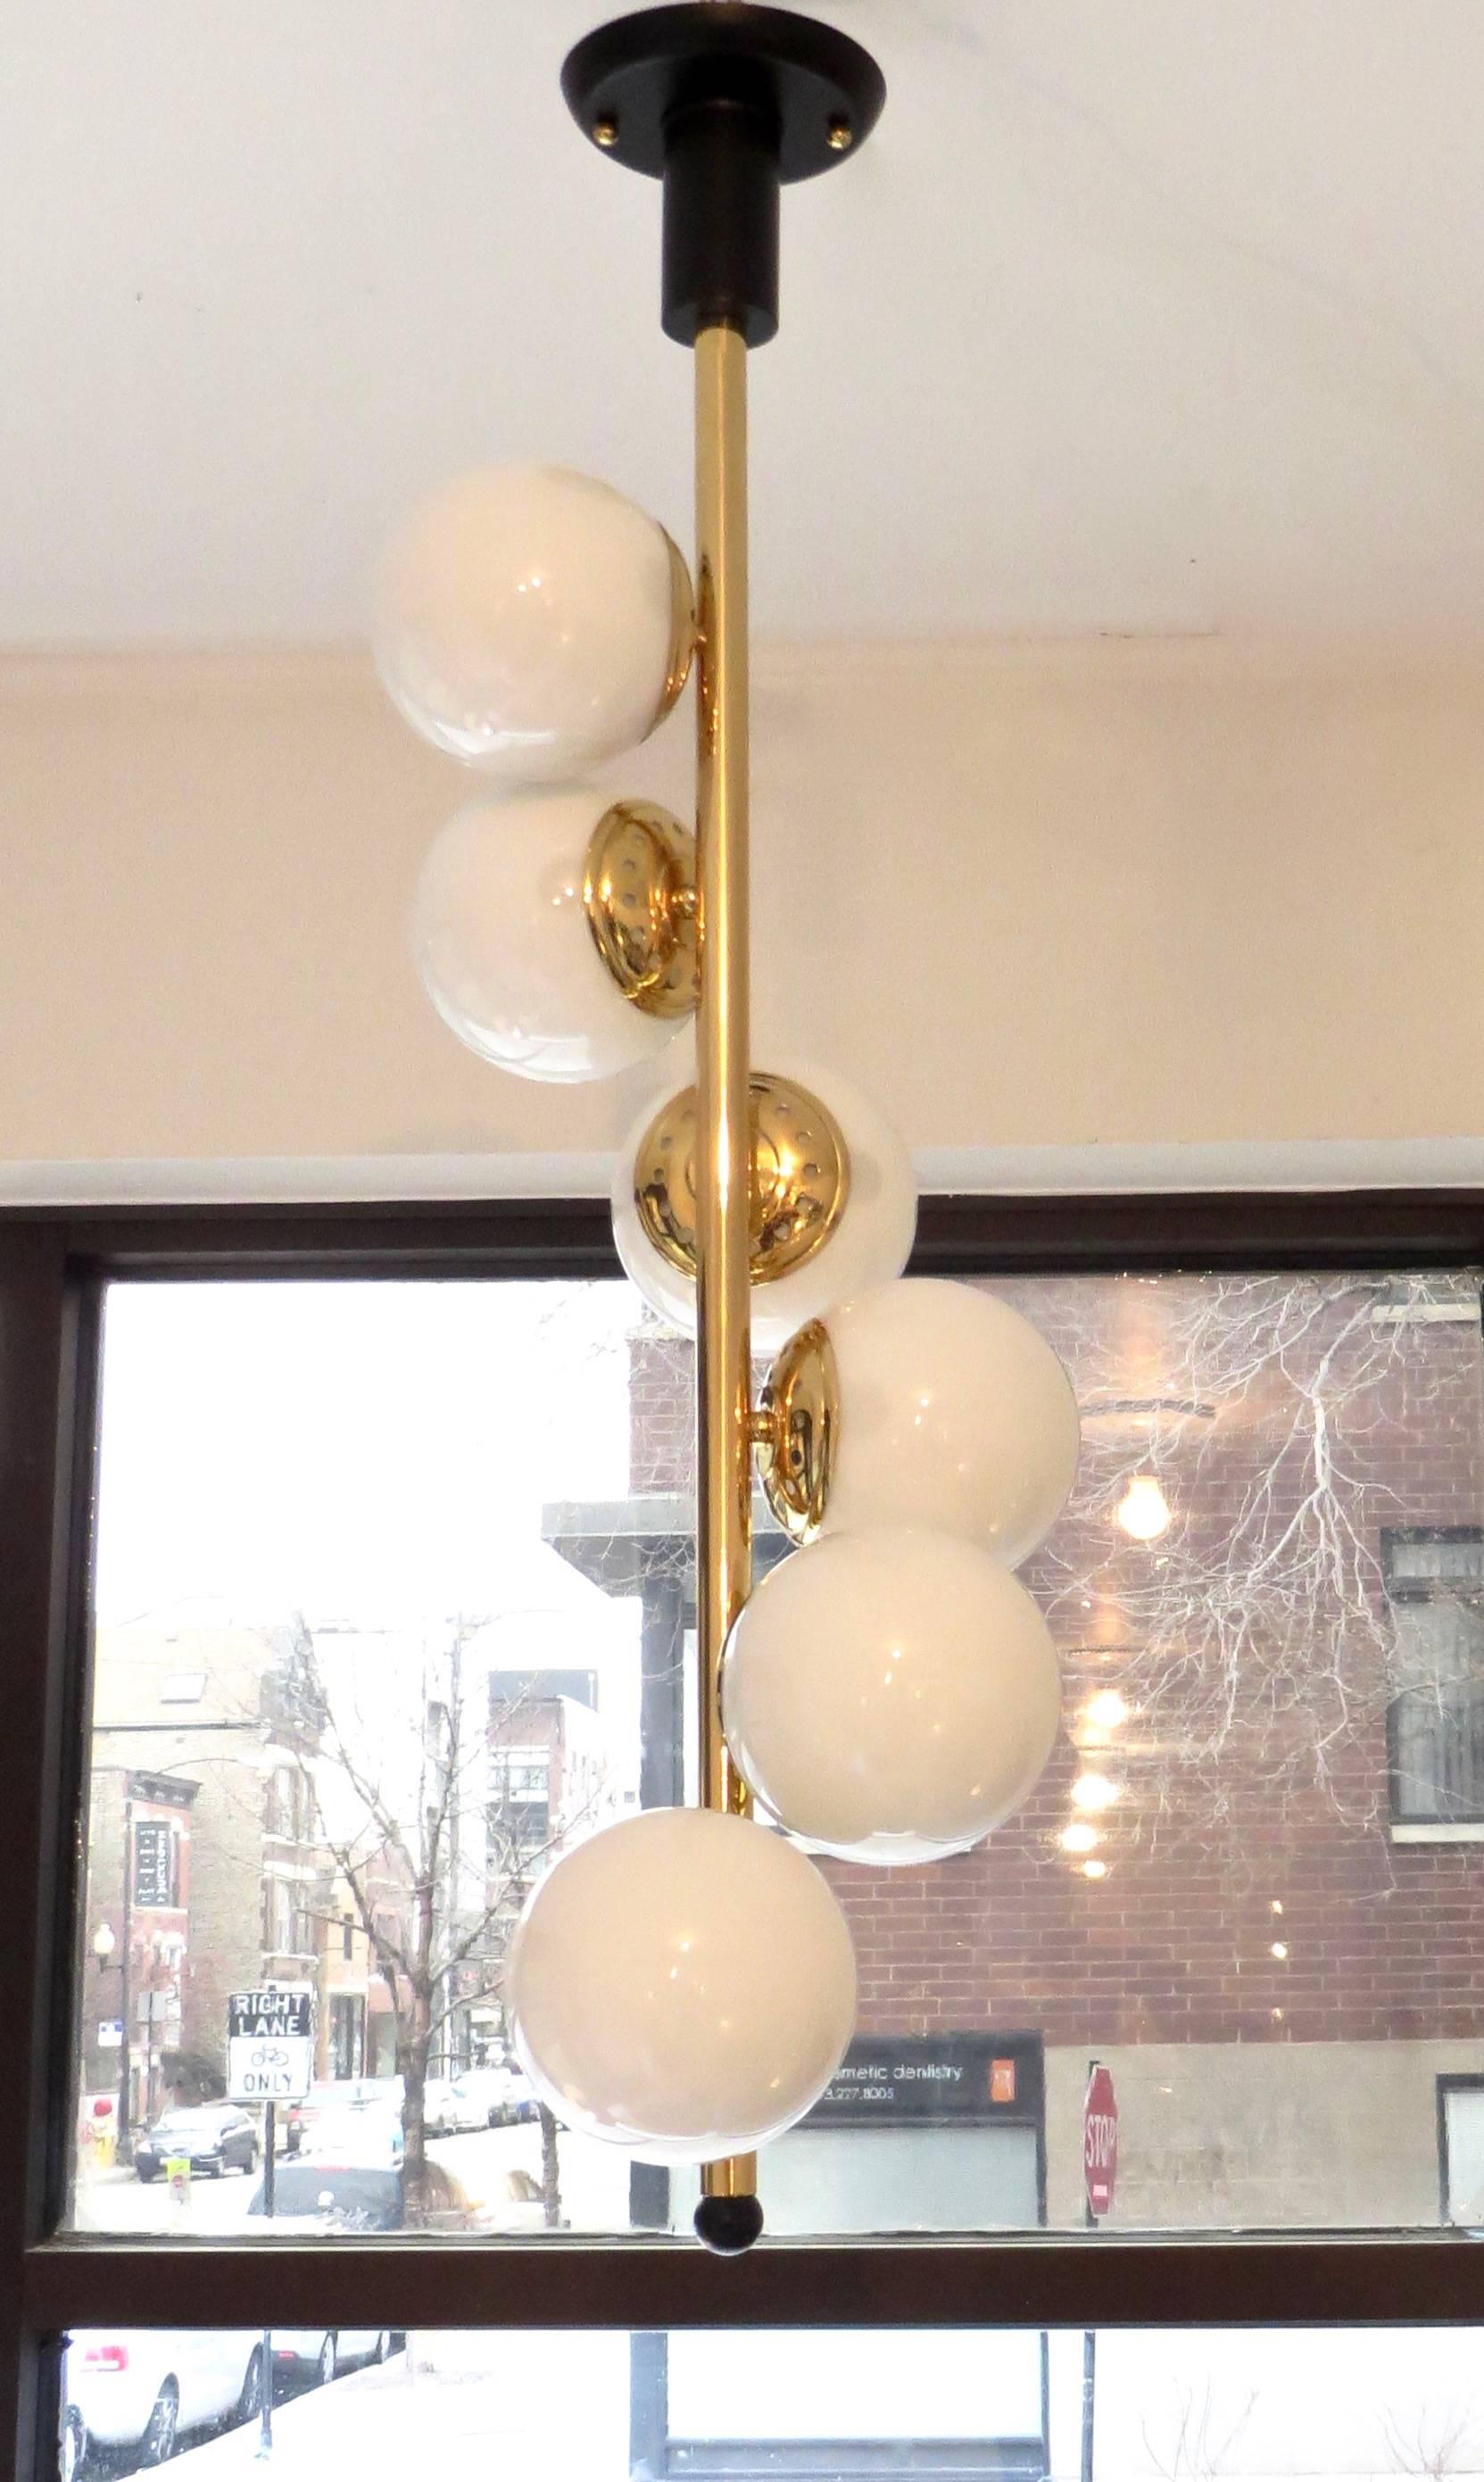 Mid-20th Century Italian Six-Light Brass and Glass Chandelier with Opaque White Globes, Stilnovo